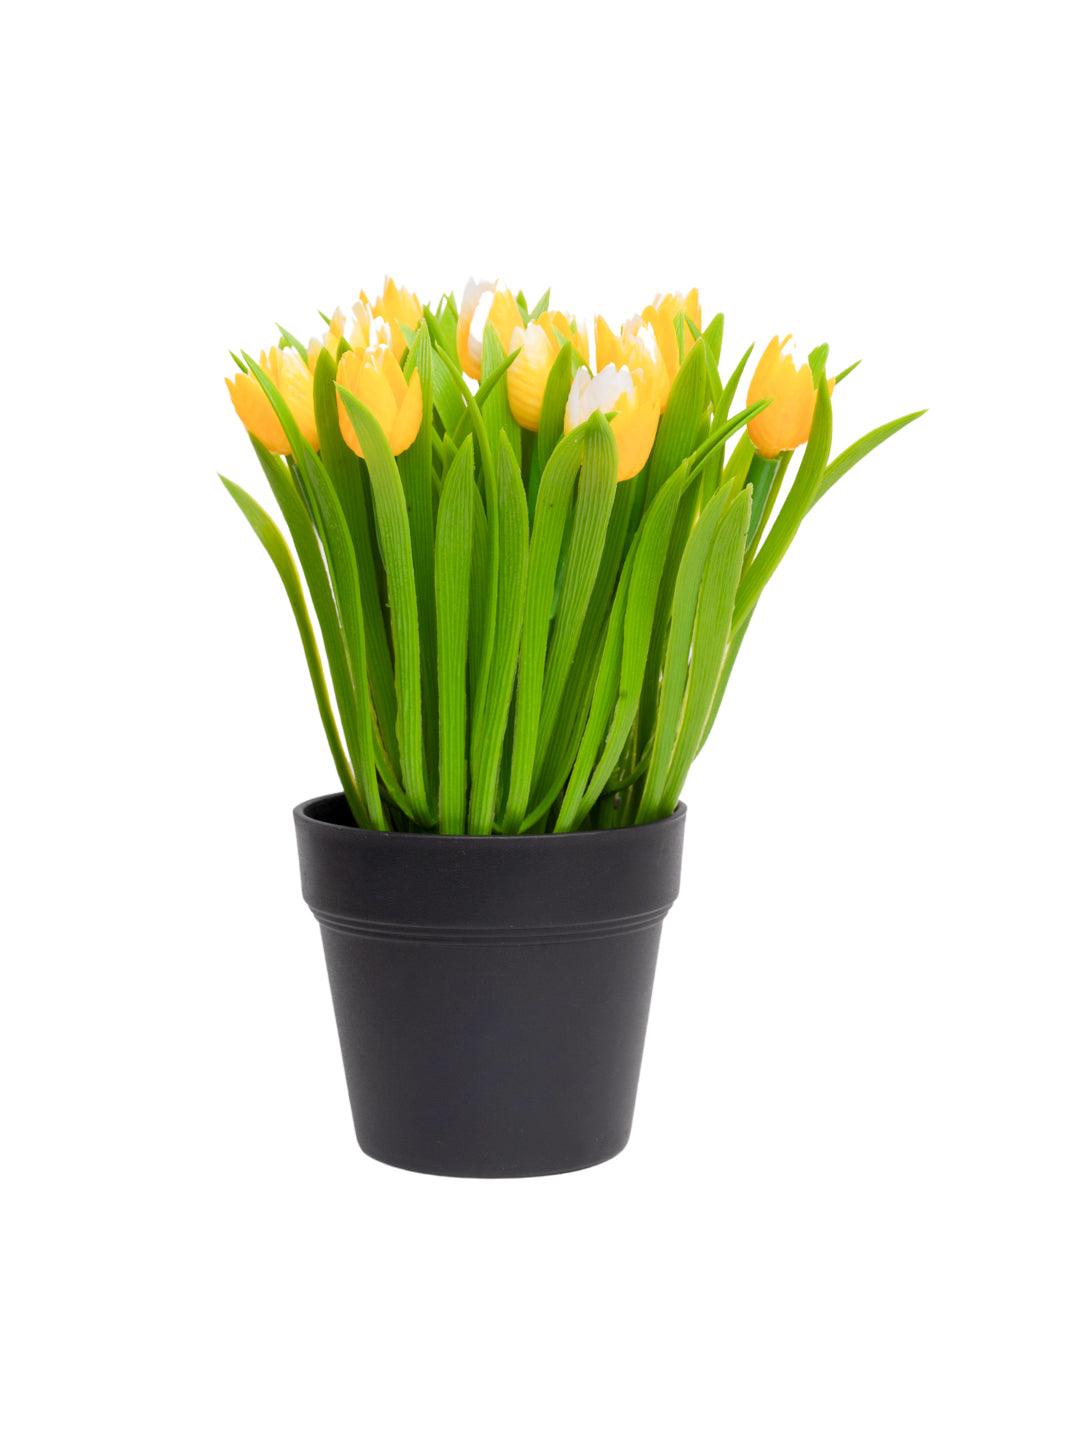 VON CASA Yellow Lily Artificial Potted Plant - MARKET 99